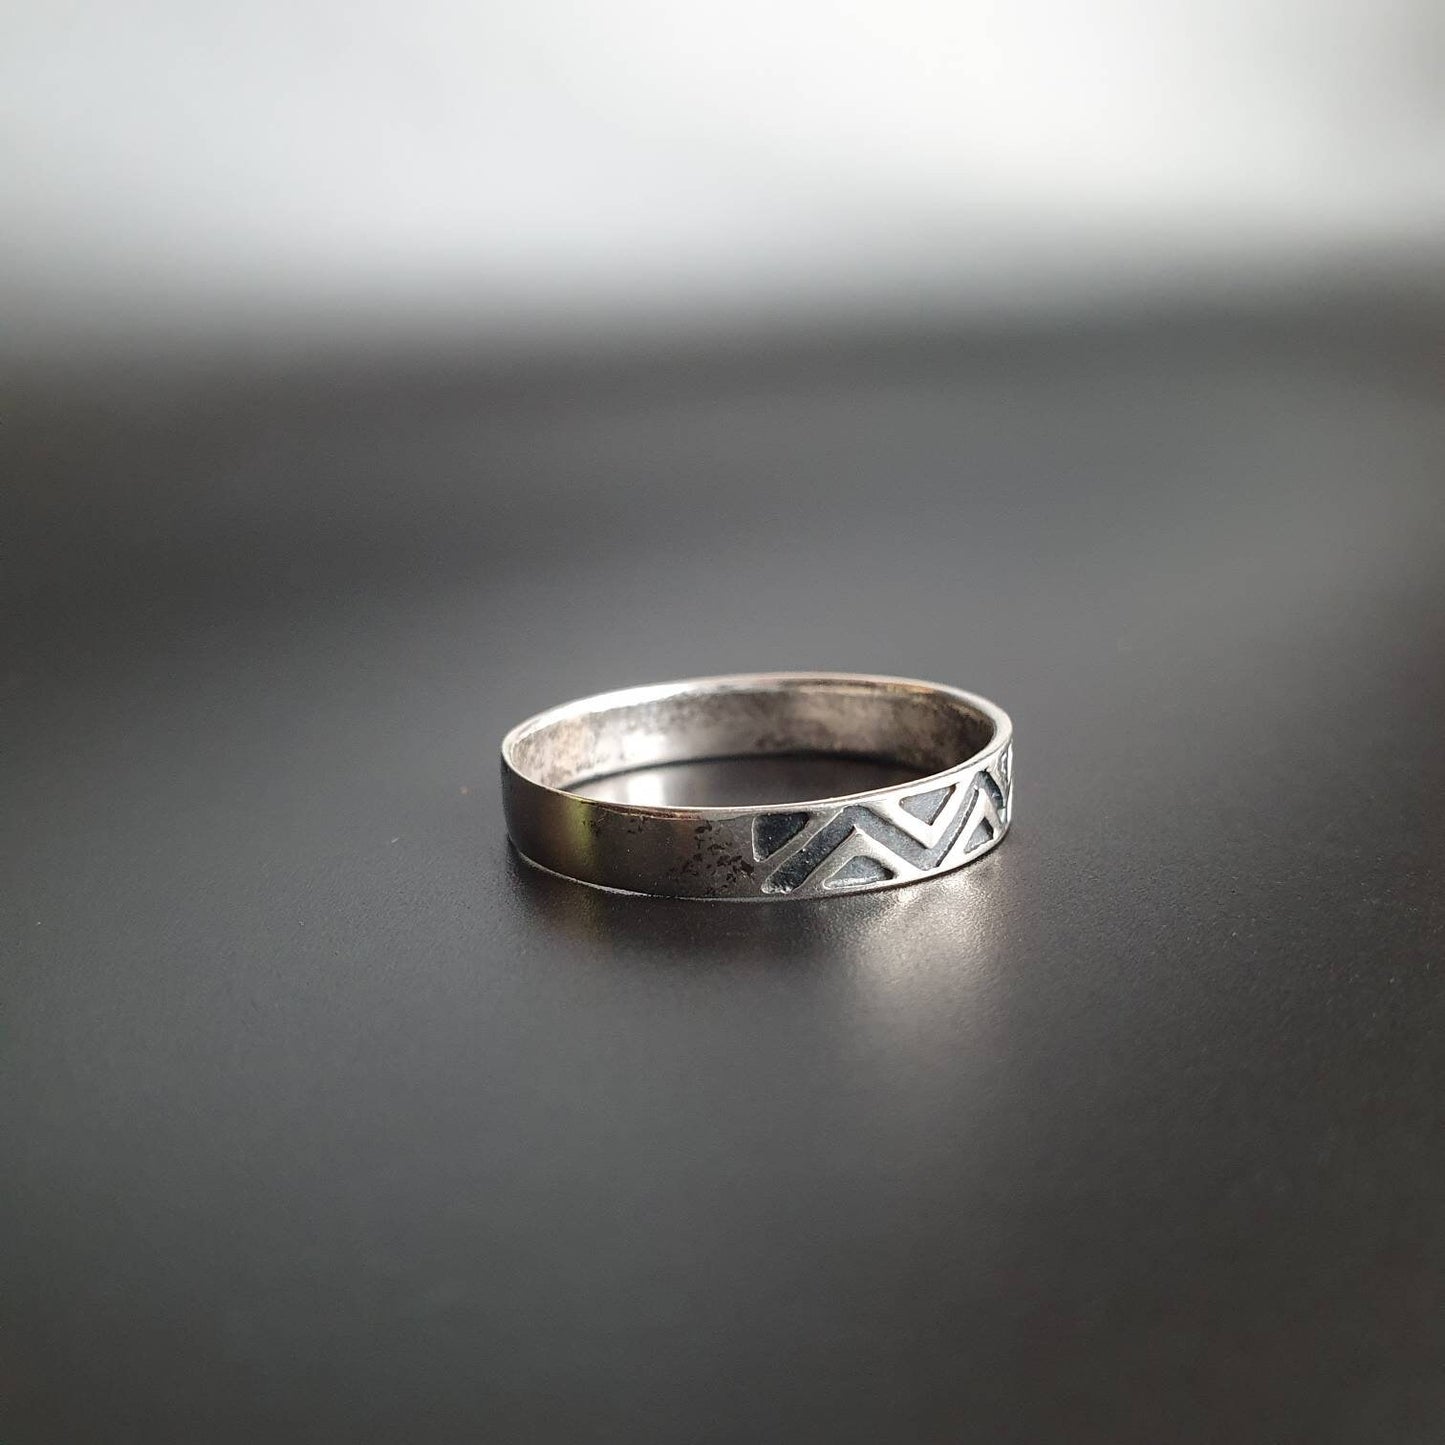 ring, mens ring, band ring large ring, silver ring, statement ring, aztec ring,  tribal ring, sterling silver Statement ring, gifts for them